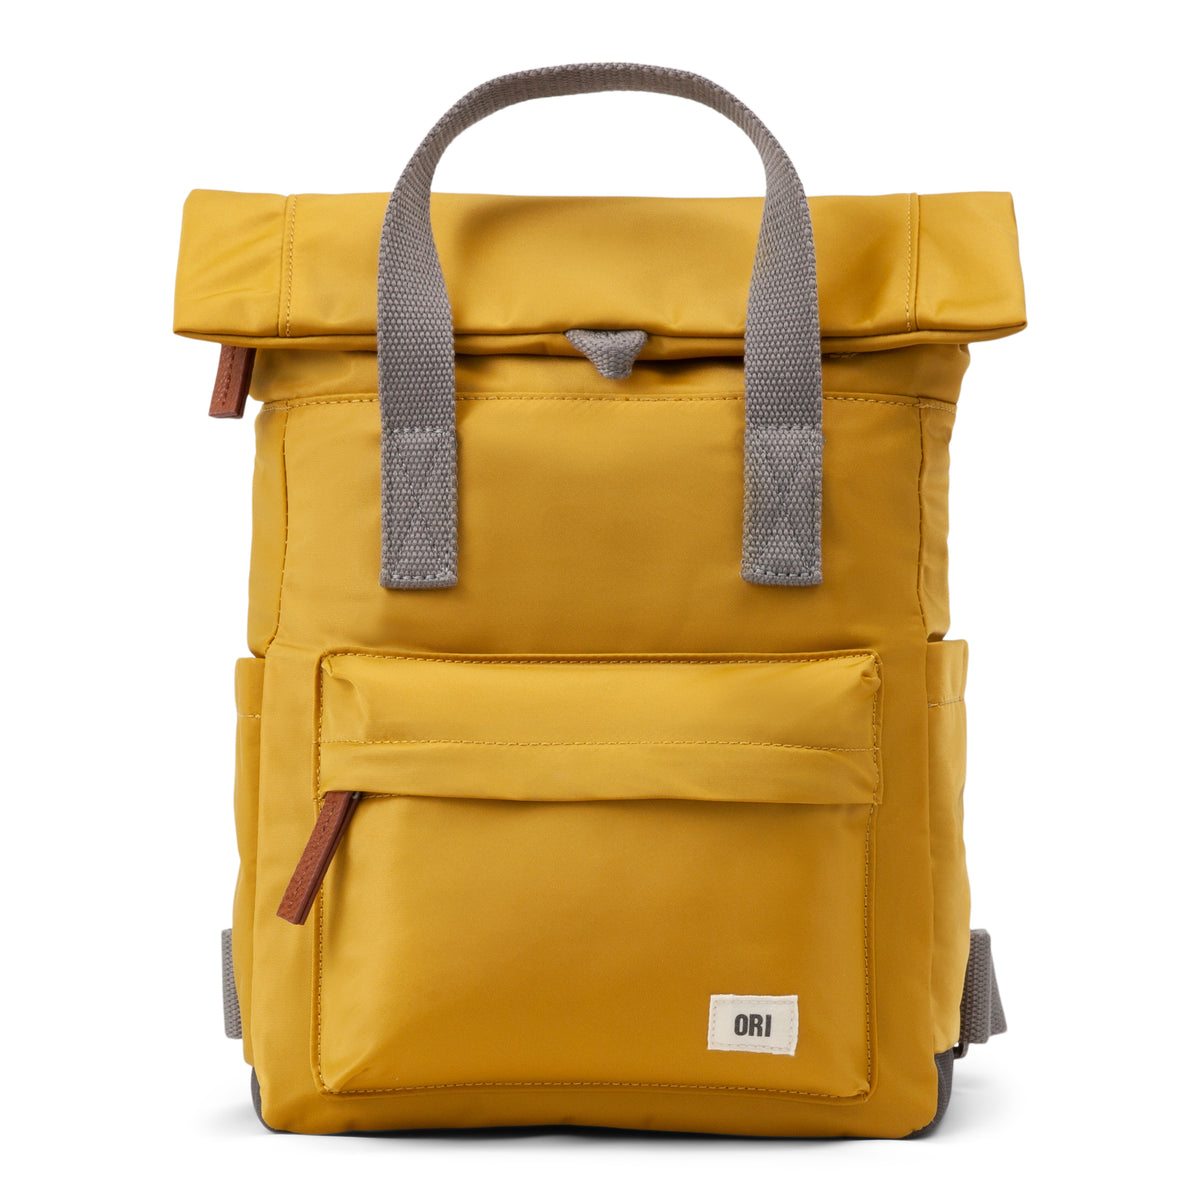 Ori Classic Collection — ORI Bags and Backpacks